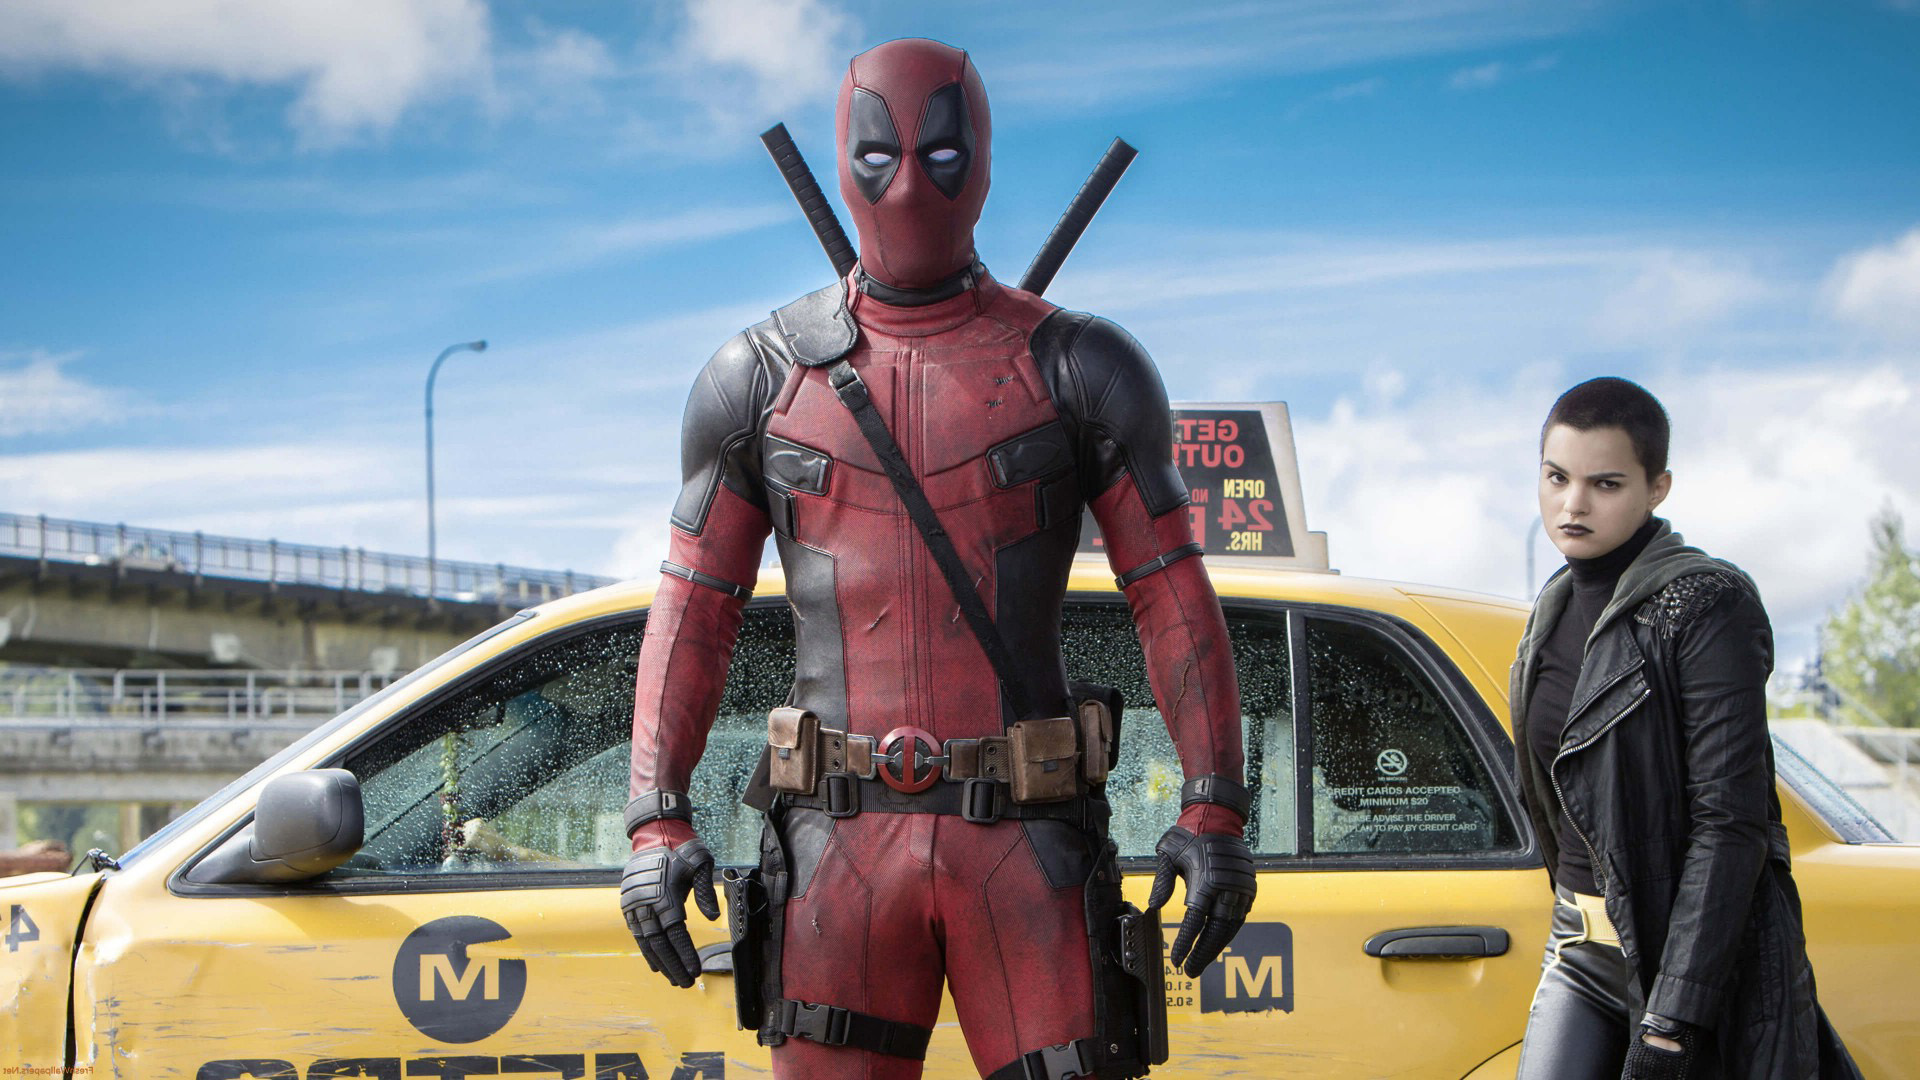  November By Stephen Comments Off on Deadpool Movie Wallpaper